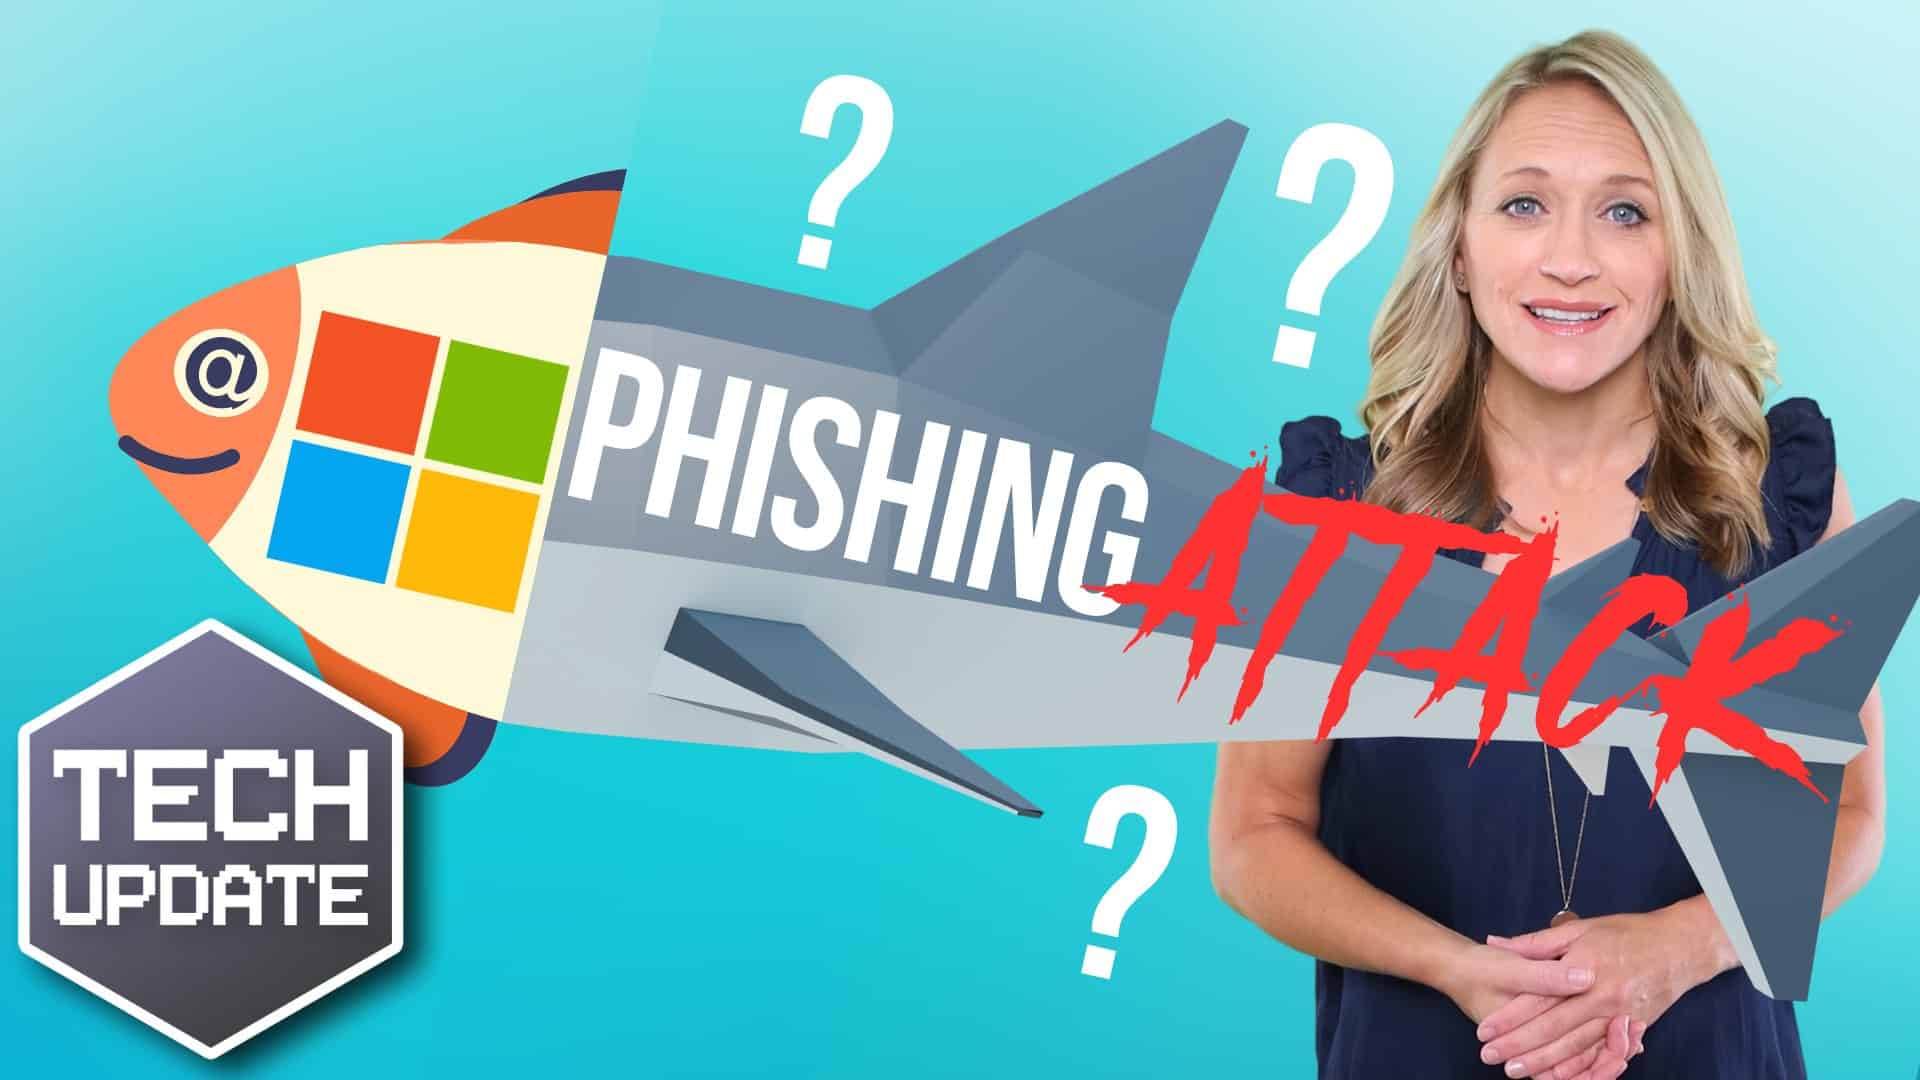 The #1 “Source” of Phishing Attacks Will Surprise You cover